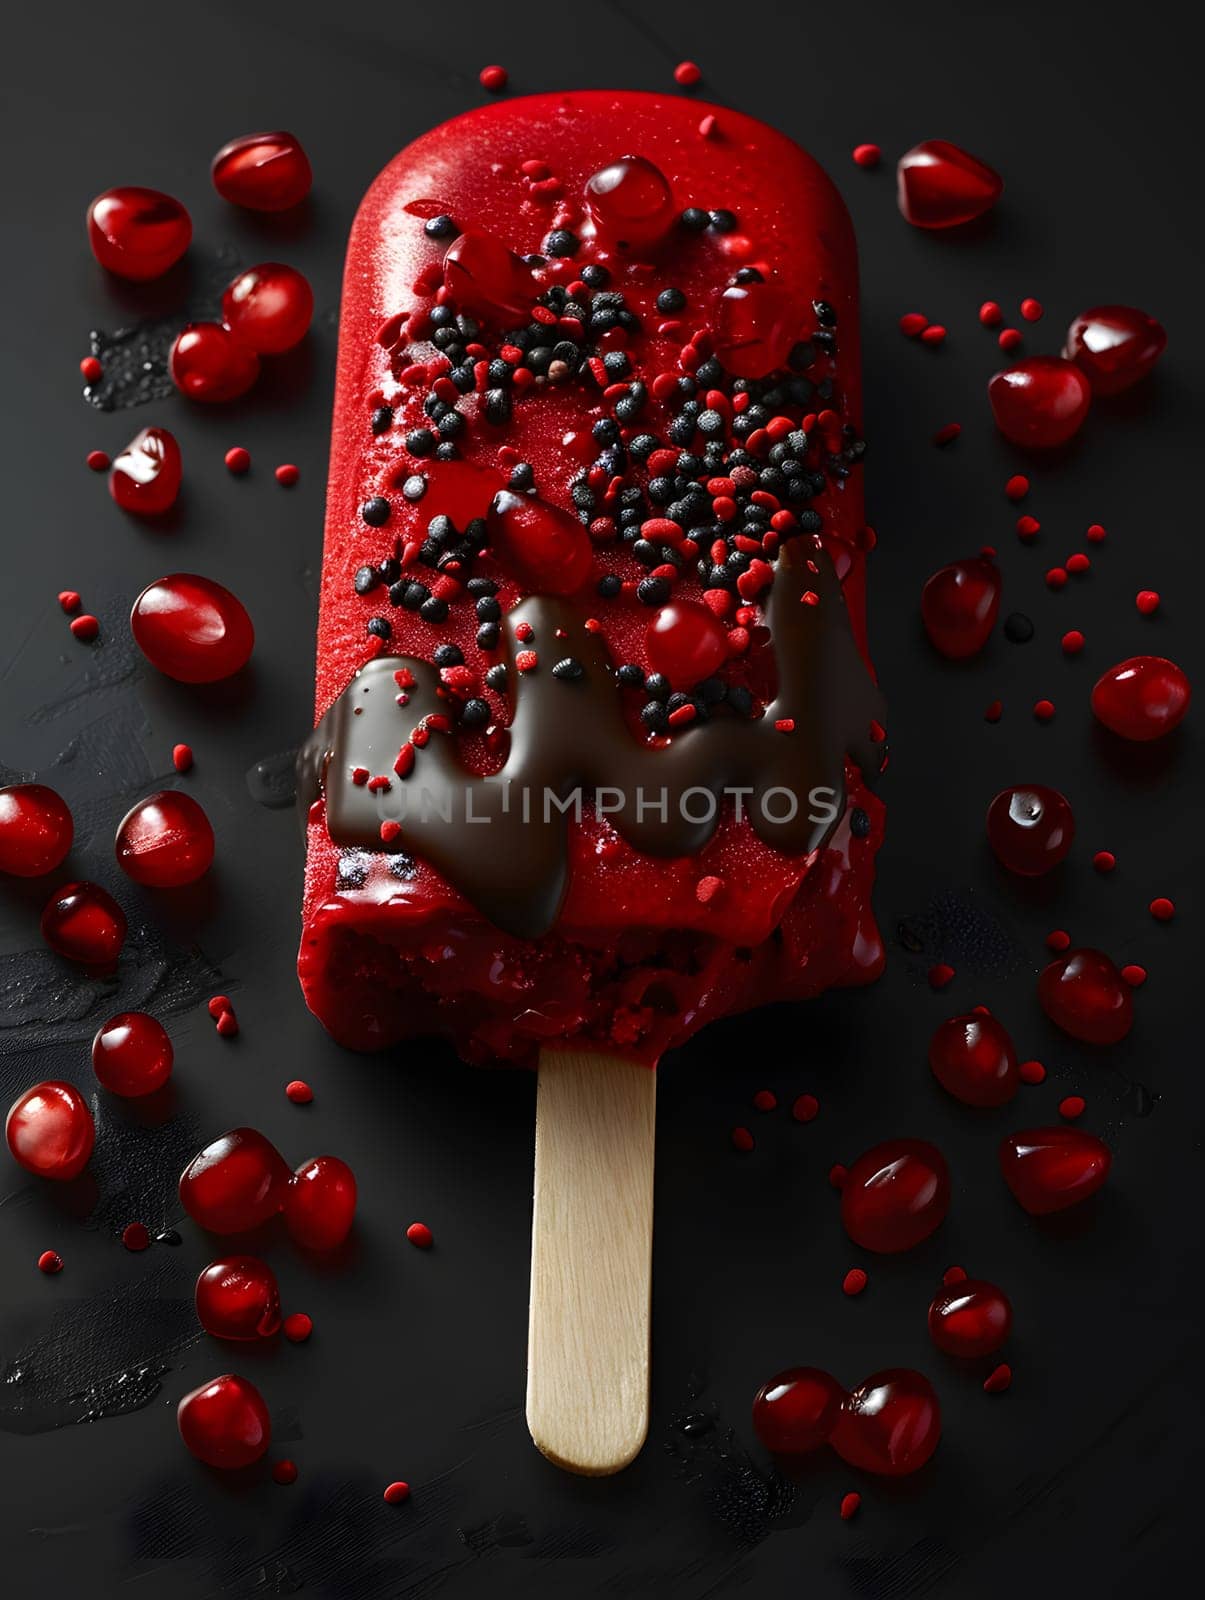 a red popsicle with chocolate sprinkles and pomegranate seeds by Nadtochiy